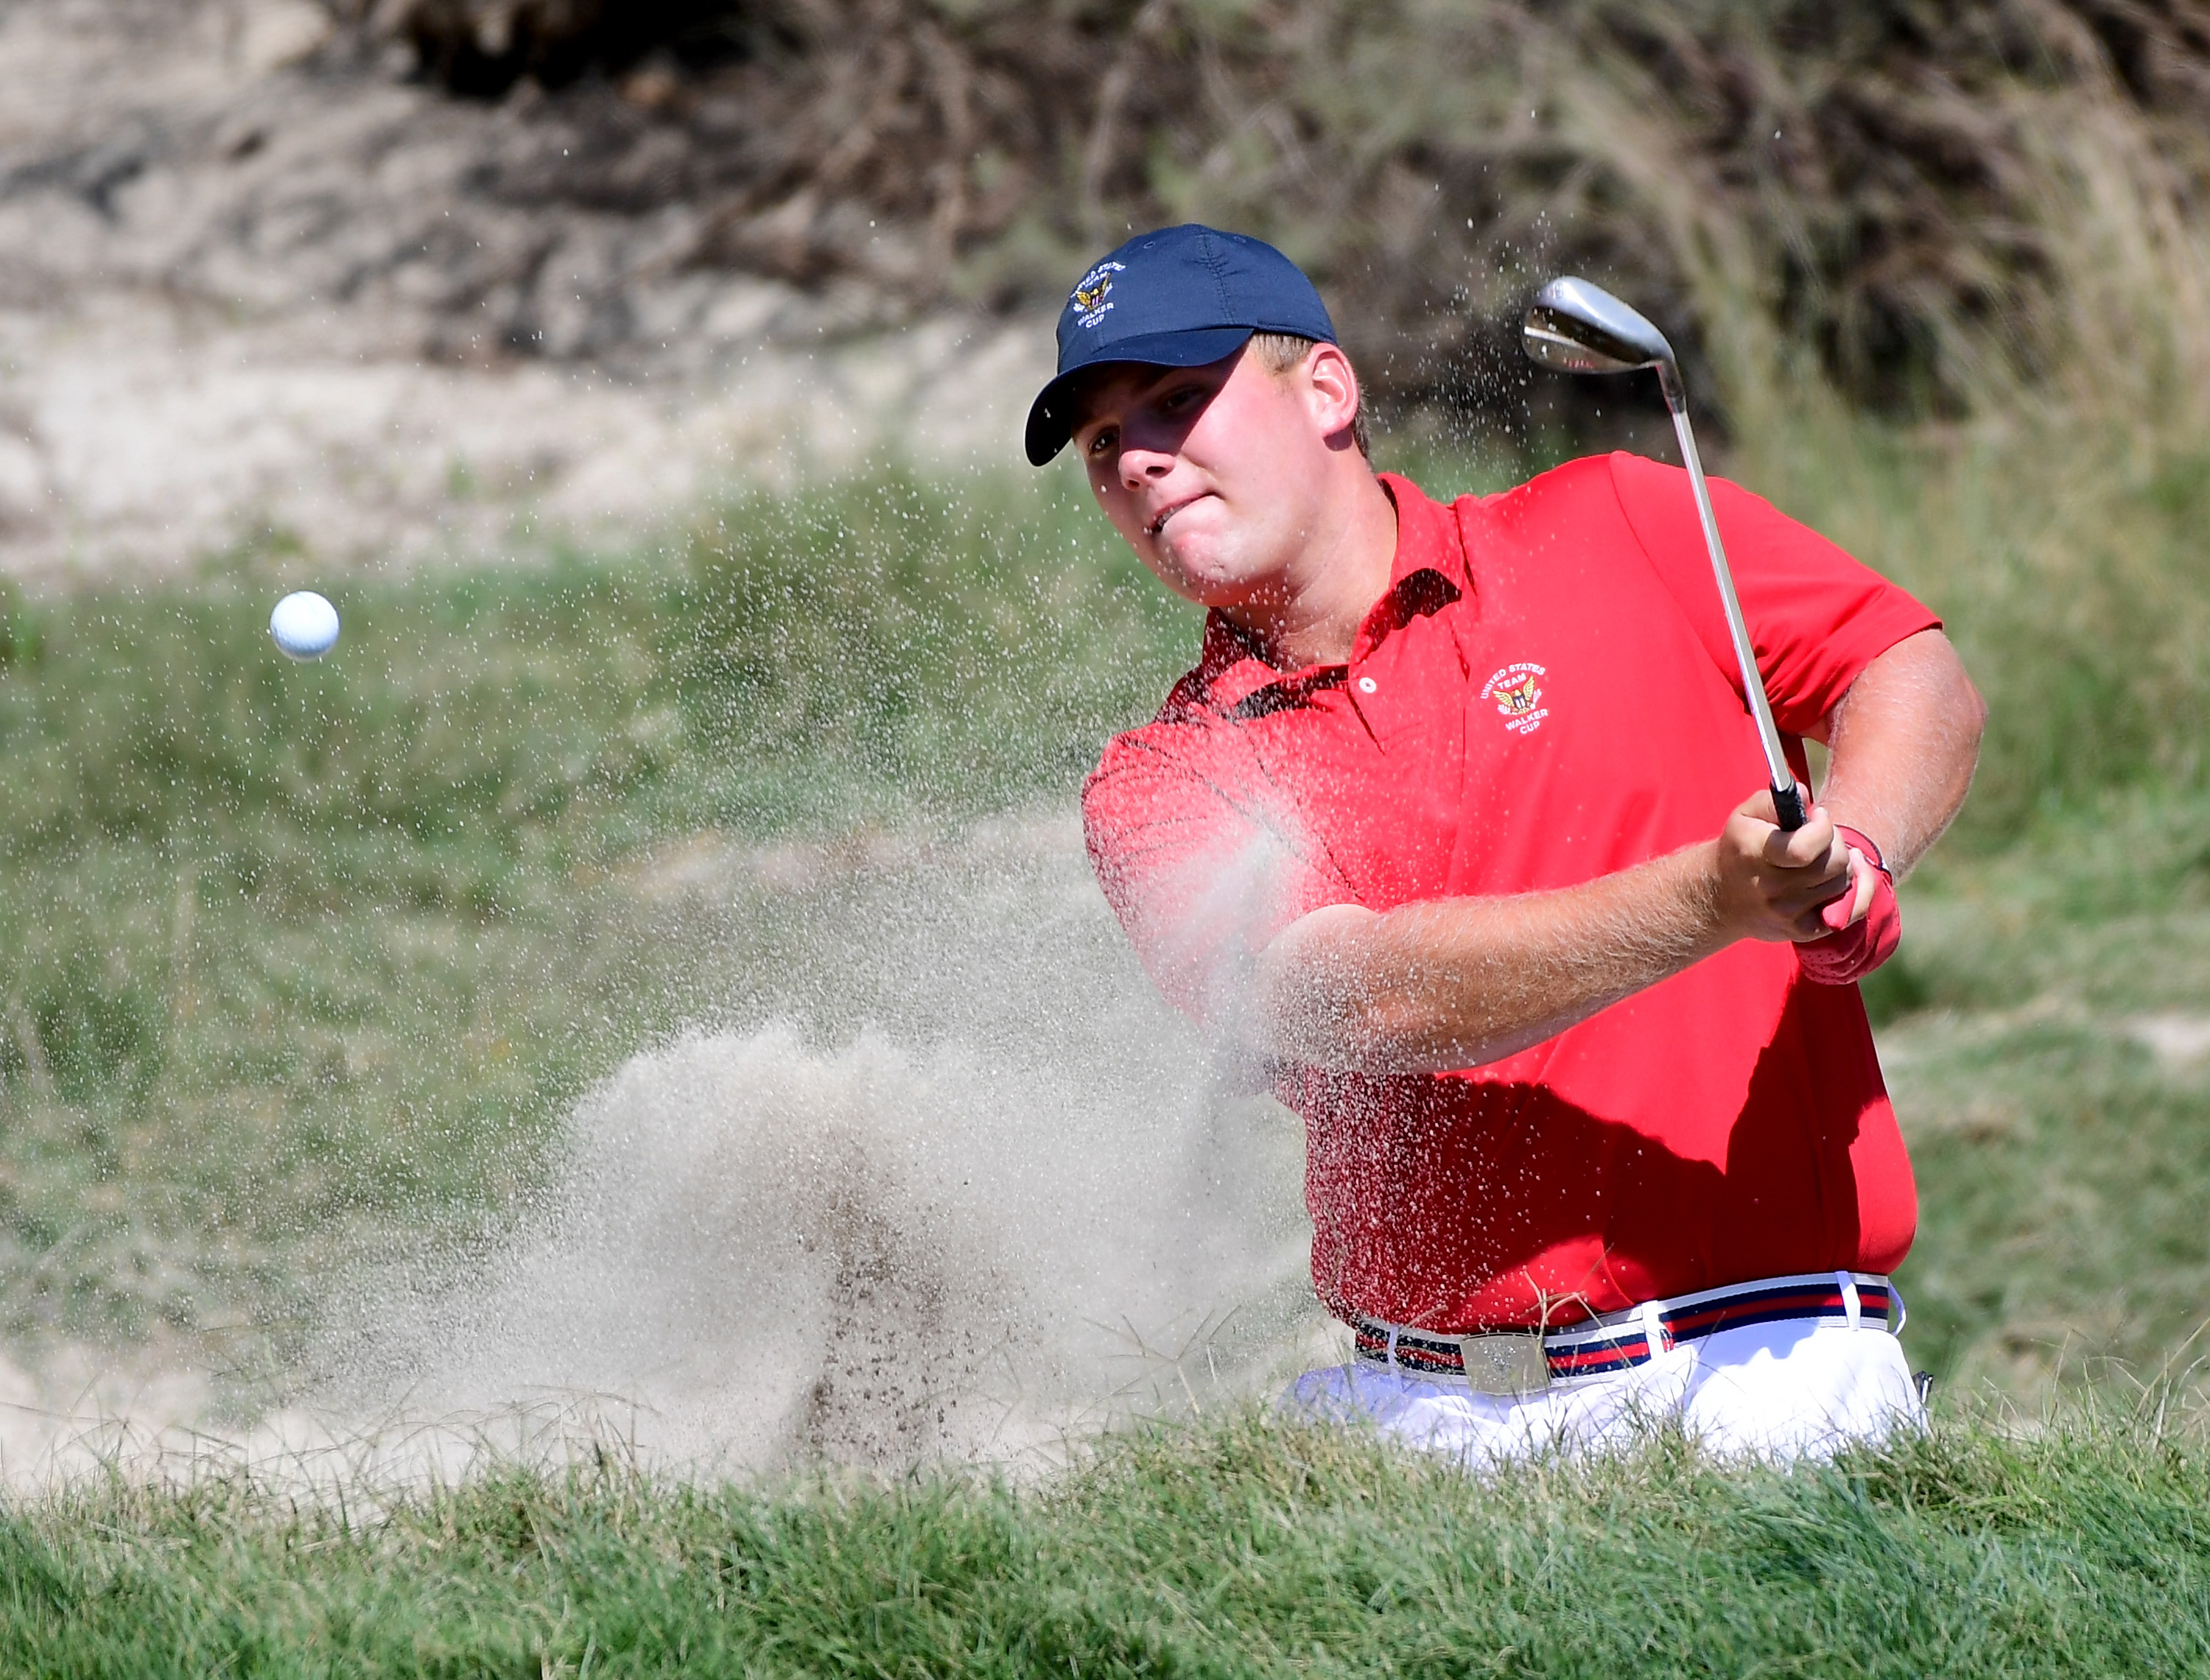 LOS ANGELES, CA - SEPTEMBER 09: Braden Thornberry of Team USA his out of a bunker on the eighth hole in a two up win over Harry Ellis of Team Great Britain and Ireland during the singles matches in the 2017 Walker Cup at the Los Angeles Country Club on September 9, 2017 in Los Angeles, California. (Photo by Harry How/Getty Images)